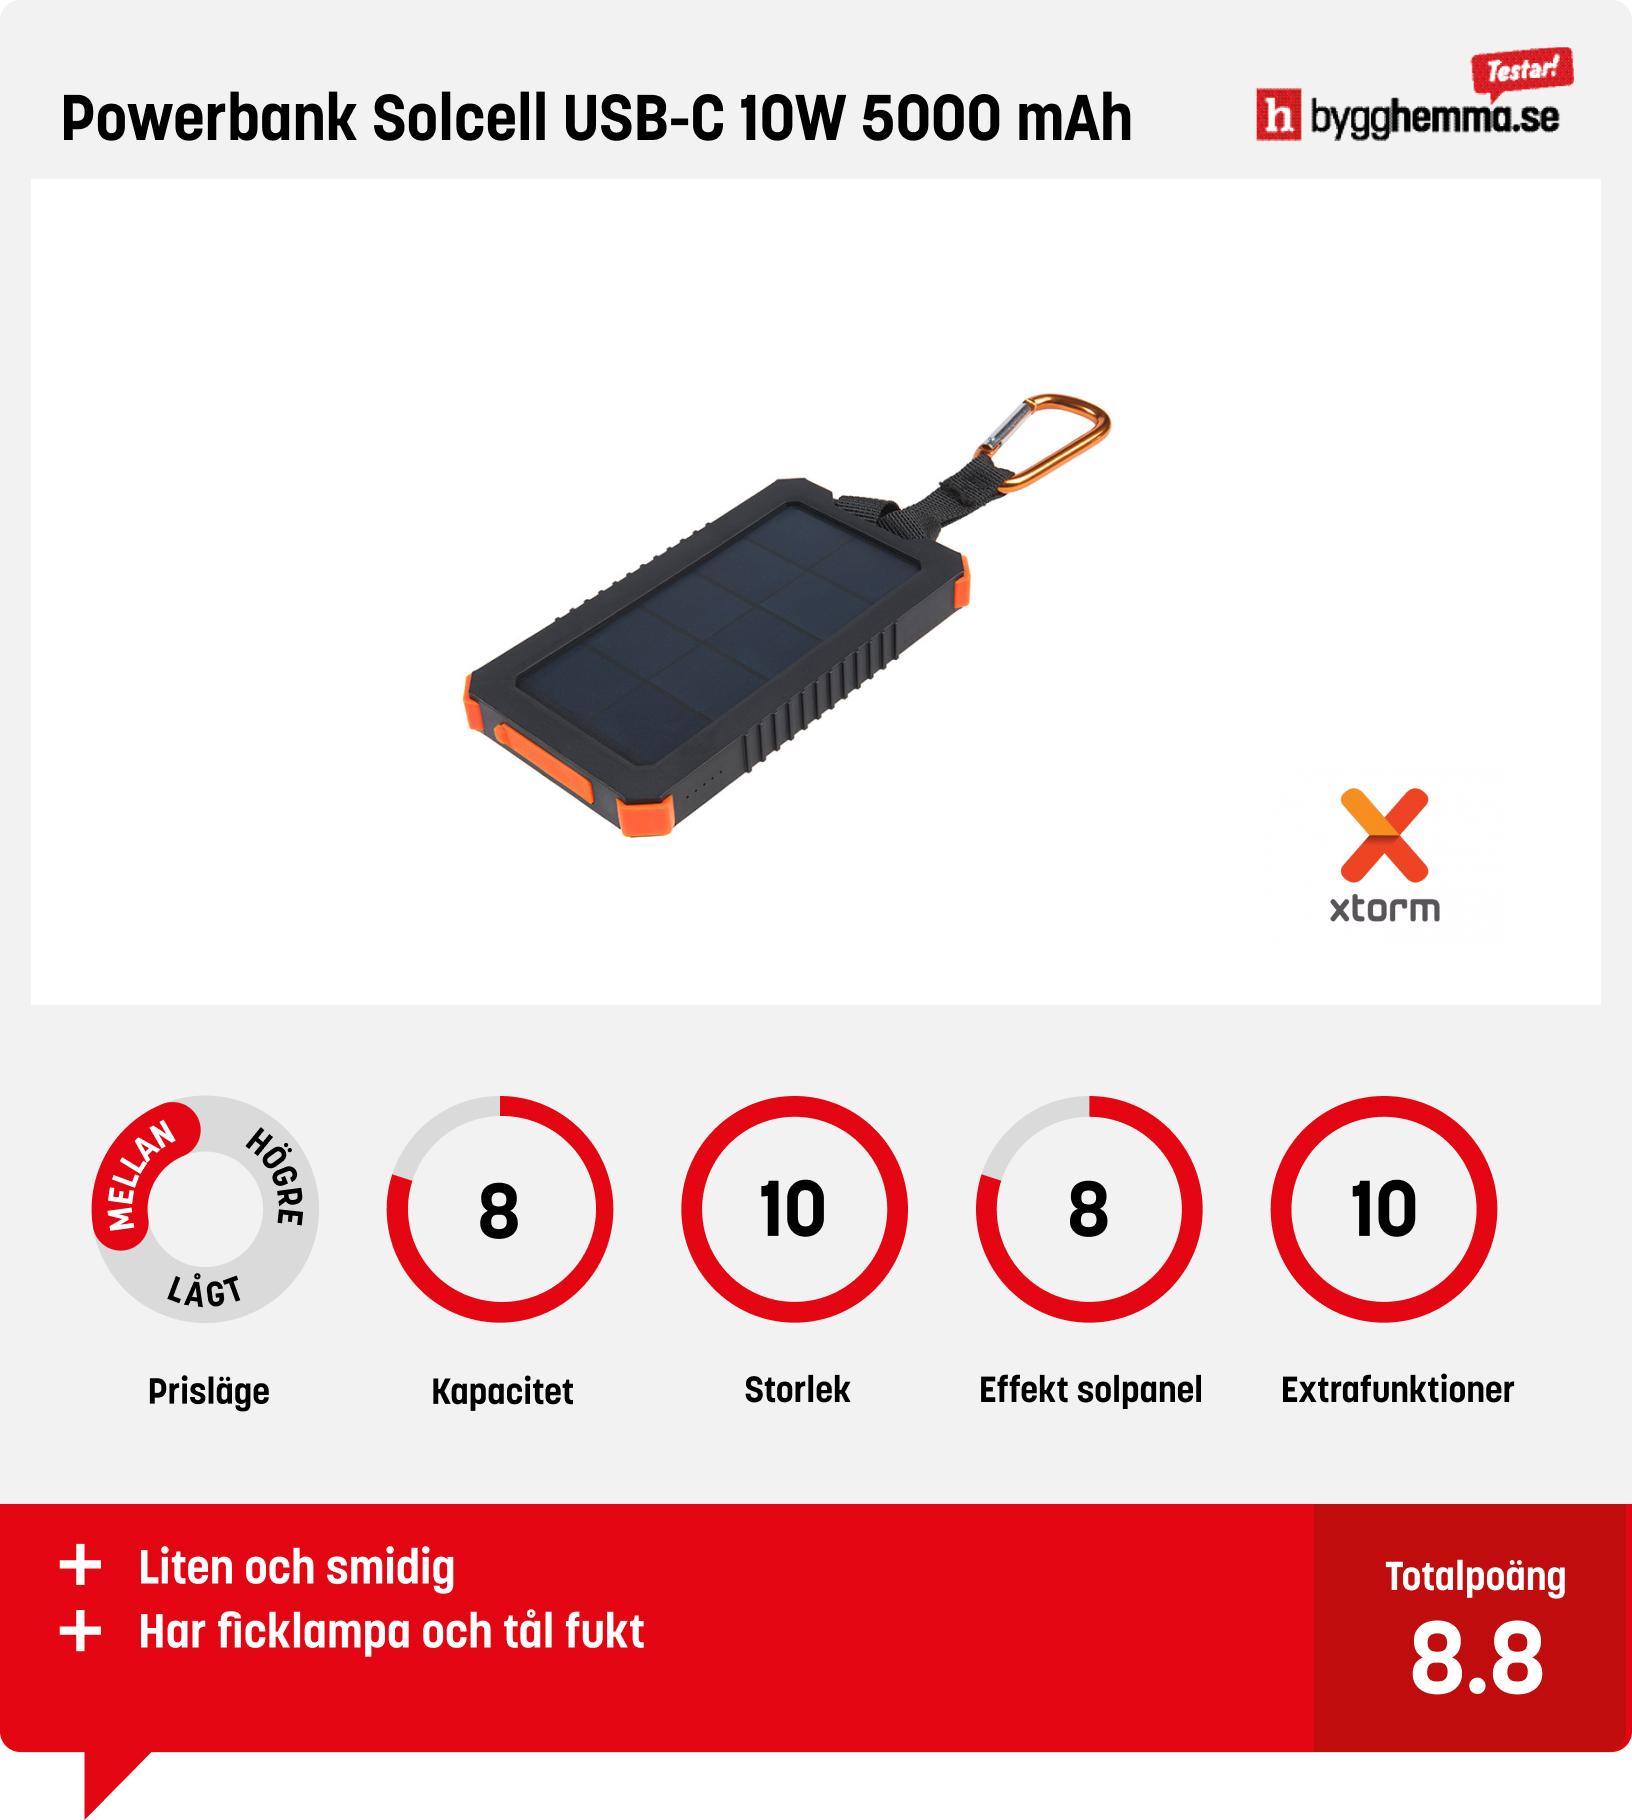 Powerbank solcell test - Powerbank Solcell USB-C 10W 5000 mAh